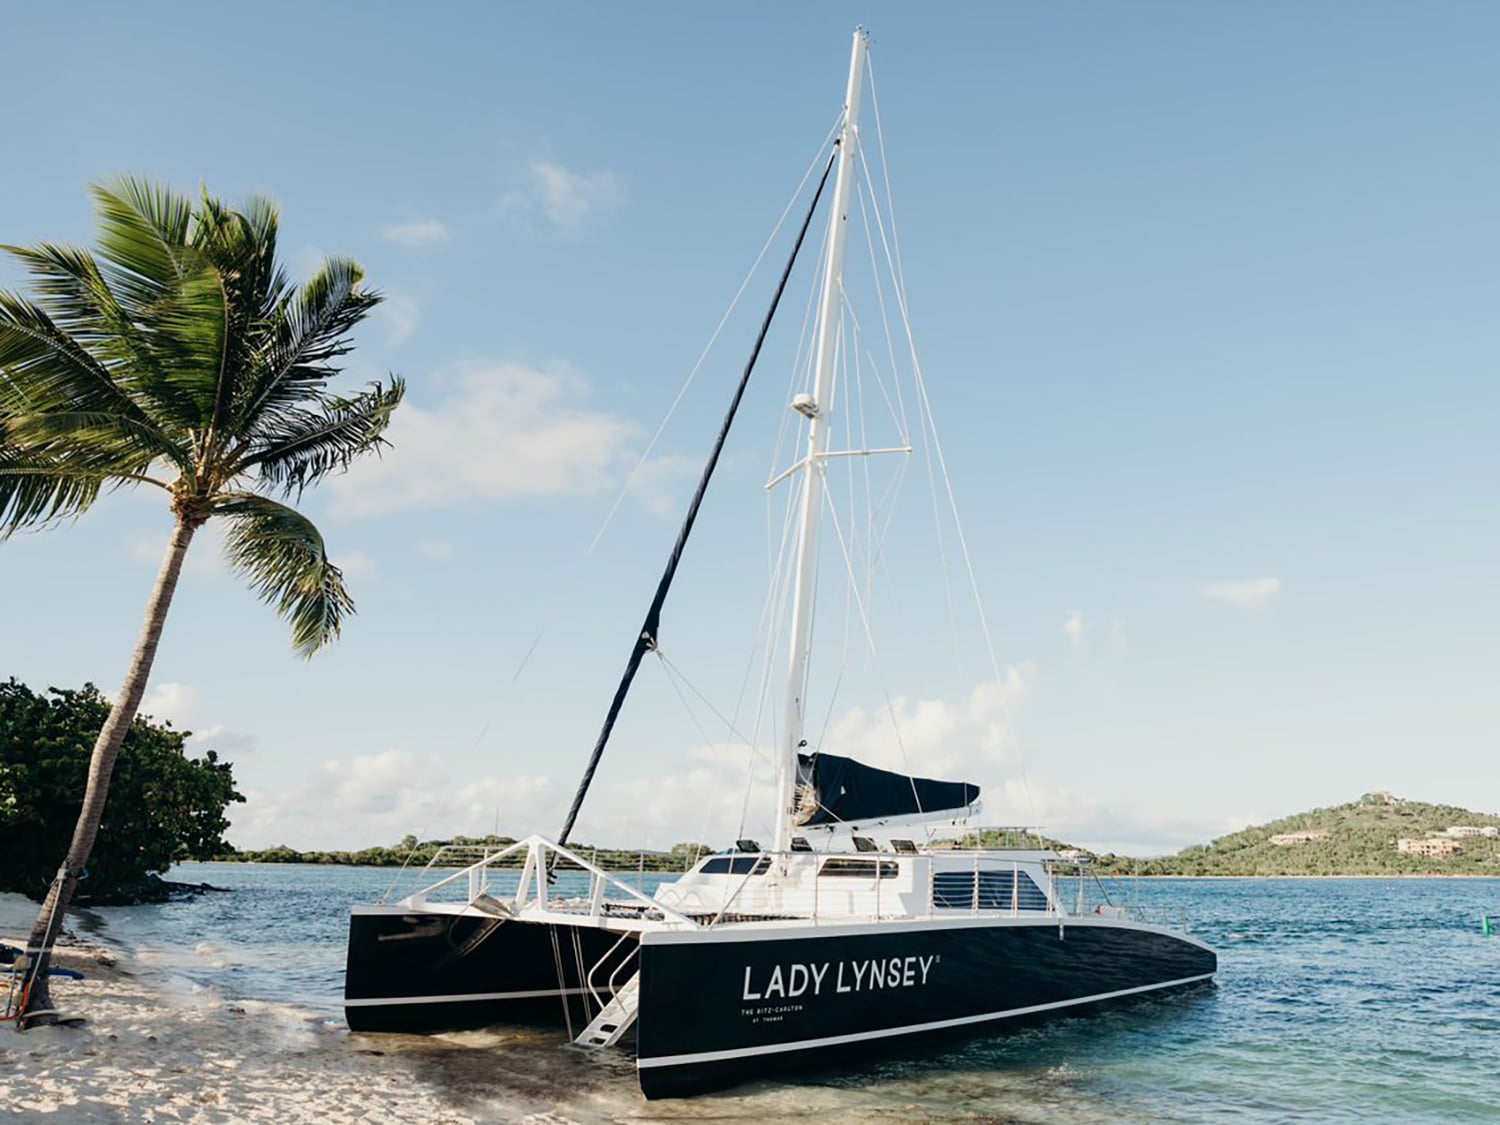 The luxurious catamaran, Lady Lynsey, is one of the many perks guests can enjoy at the Ritz-Carlton, St. Thomas, in the U.S. Virgin Islands.